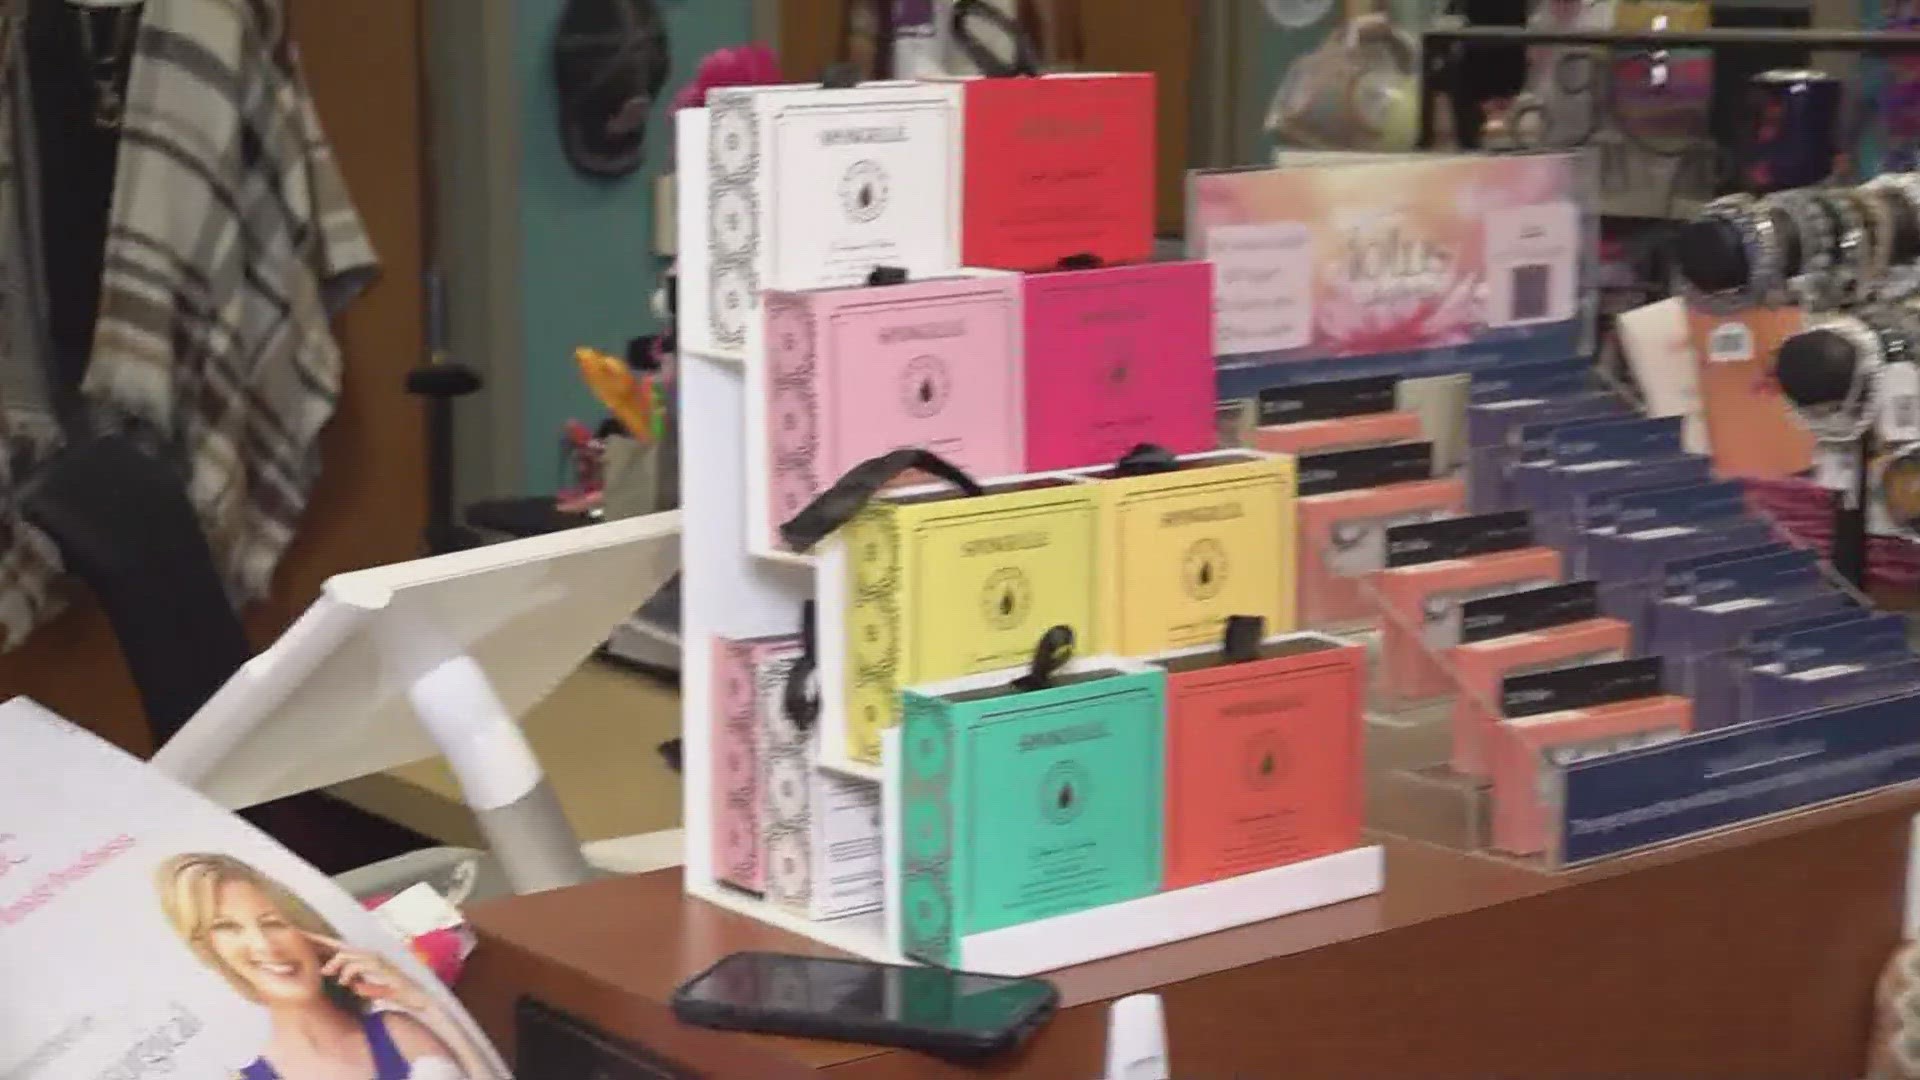 The Knoxville Comprehensive Breast Center opened a unique boutique offering products and services that help people diagnosed with breast cancer, and survivors.